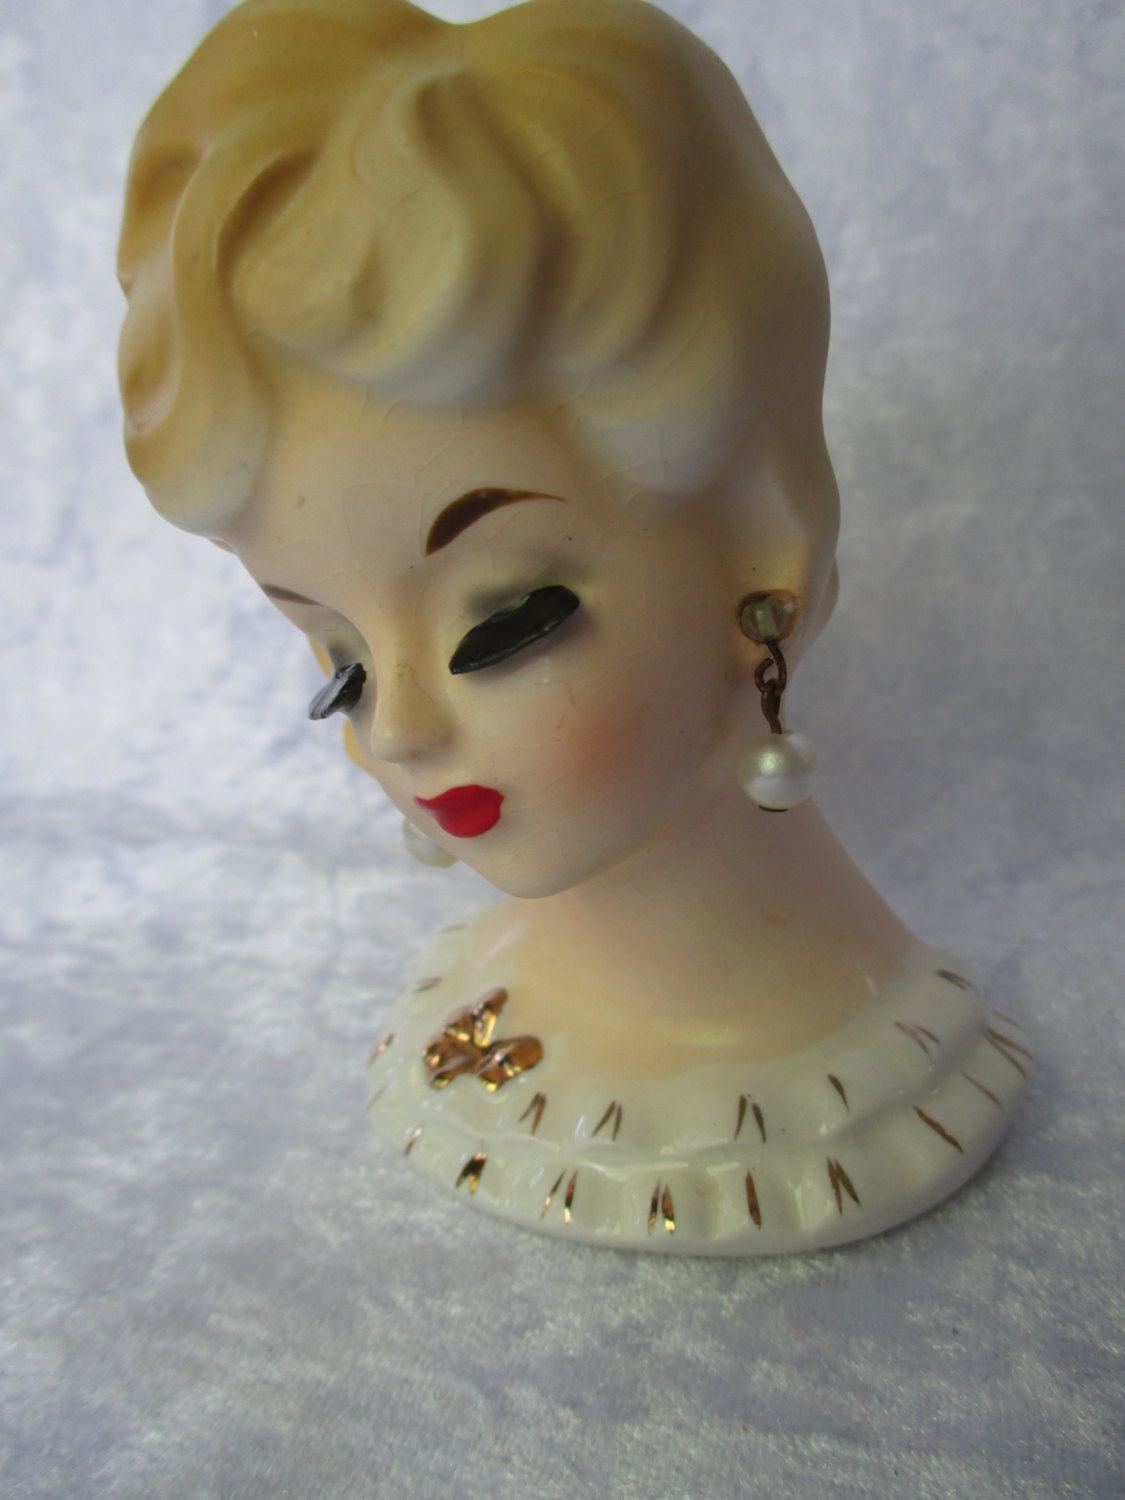 Inarco Lady Head Vase Of Headvase Sweet 1960s Glamorous Little Blonde Lady Head Vase Planter Regarding Sweet 1960s Glamorous Little Blonde Lady Head Vase Planter National Potteries Made In Japan C5937 by